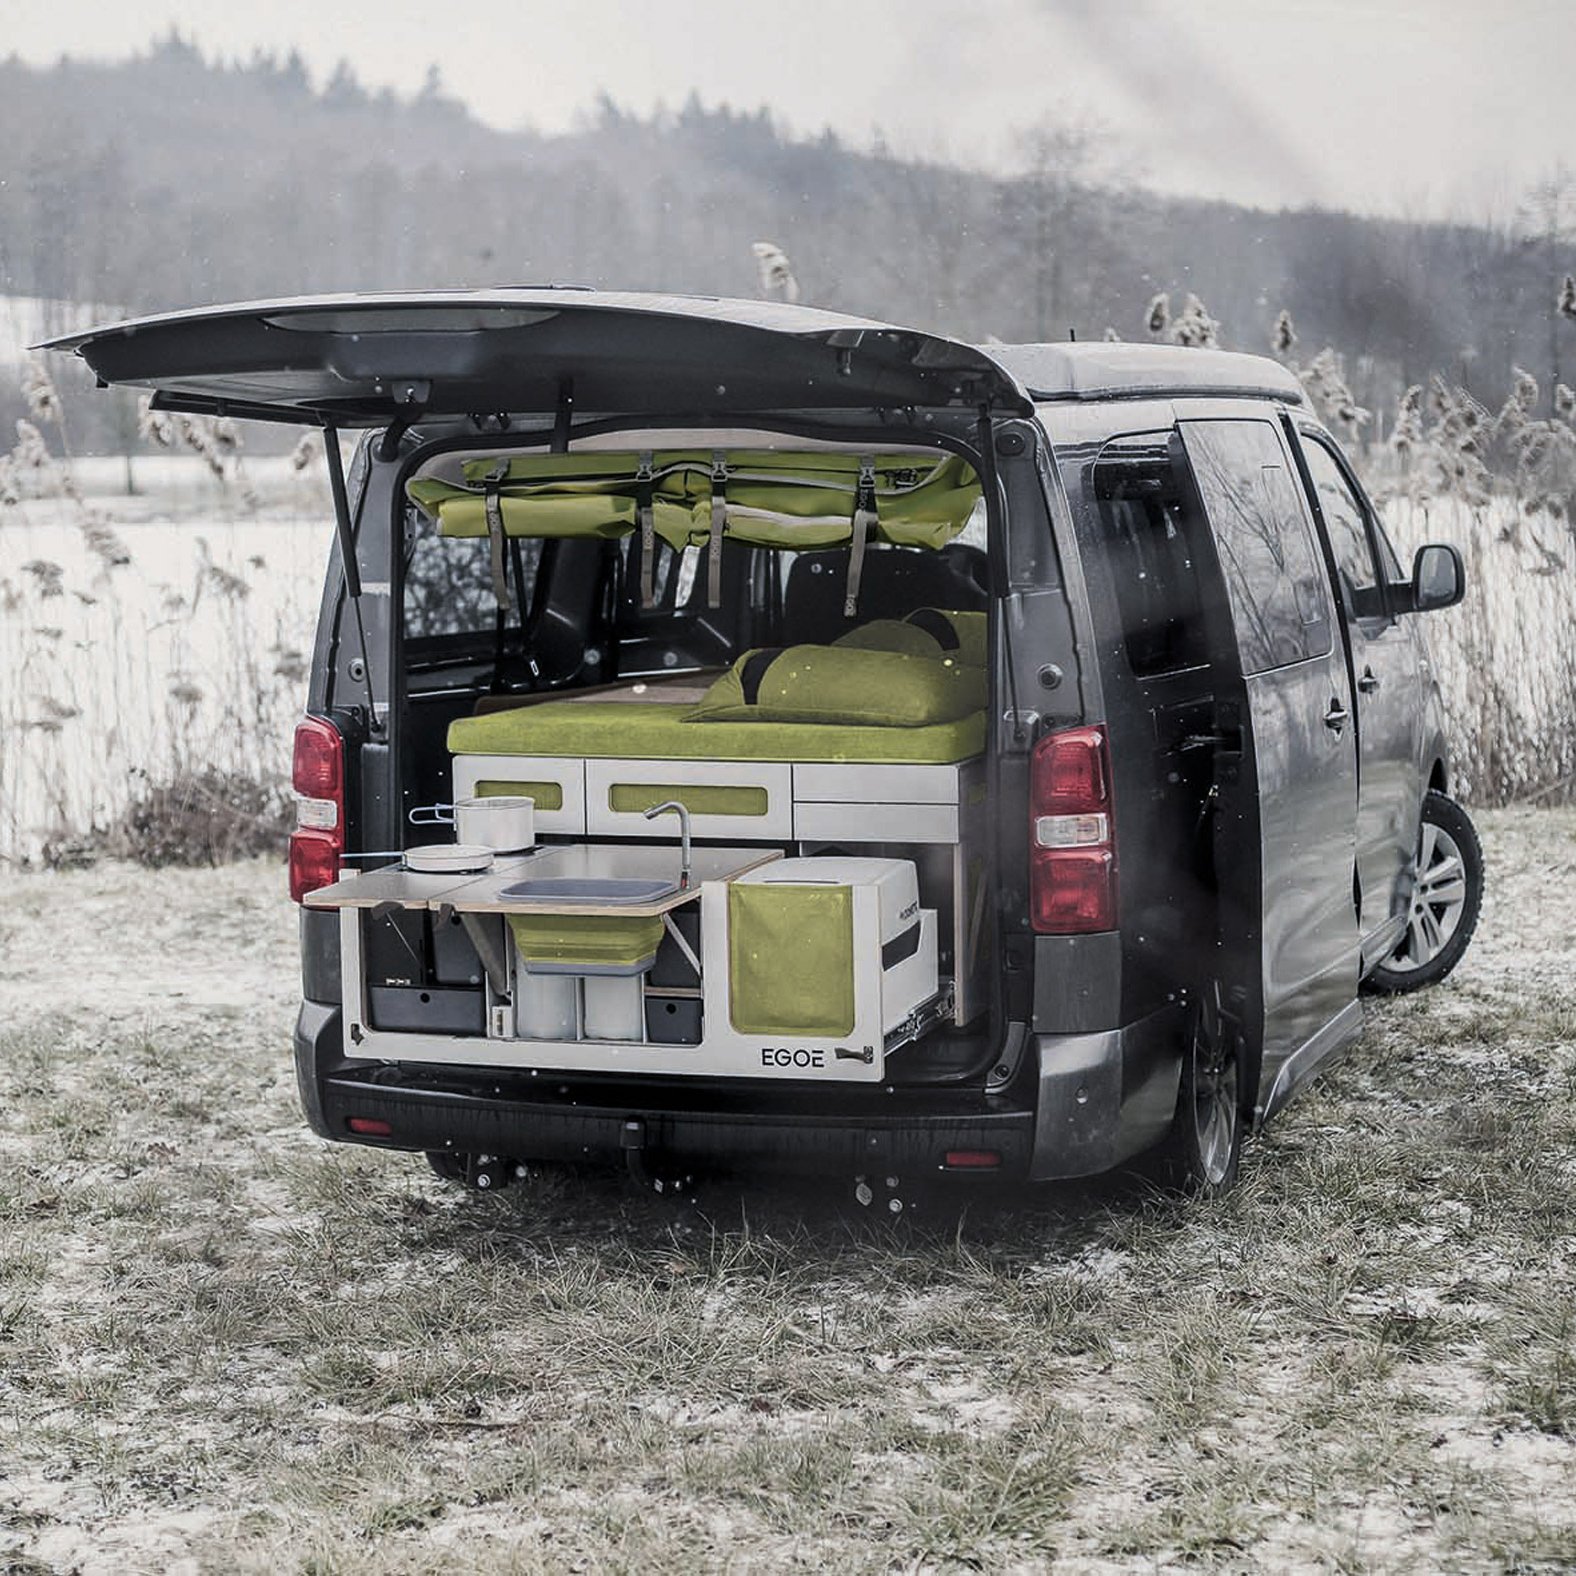 Nestbox Is A Modular Trunk Extension That Turns Cars Into Campers